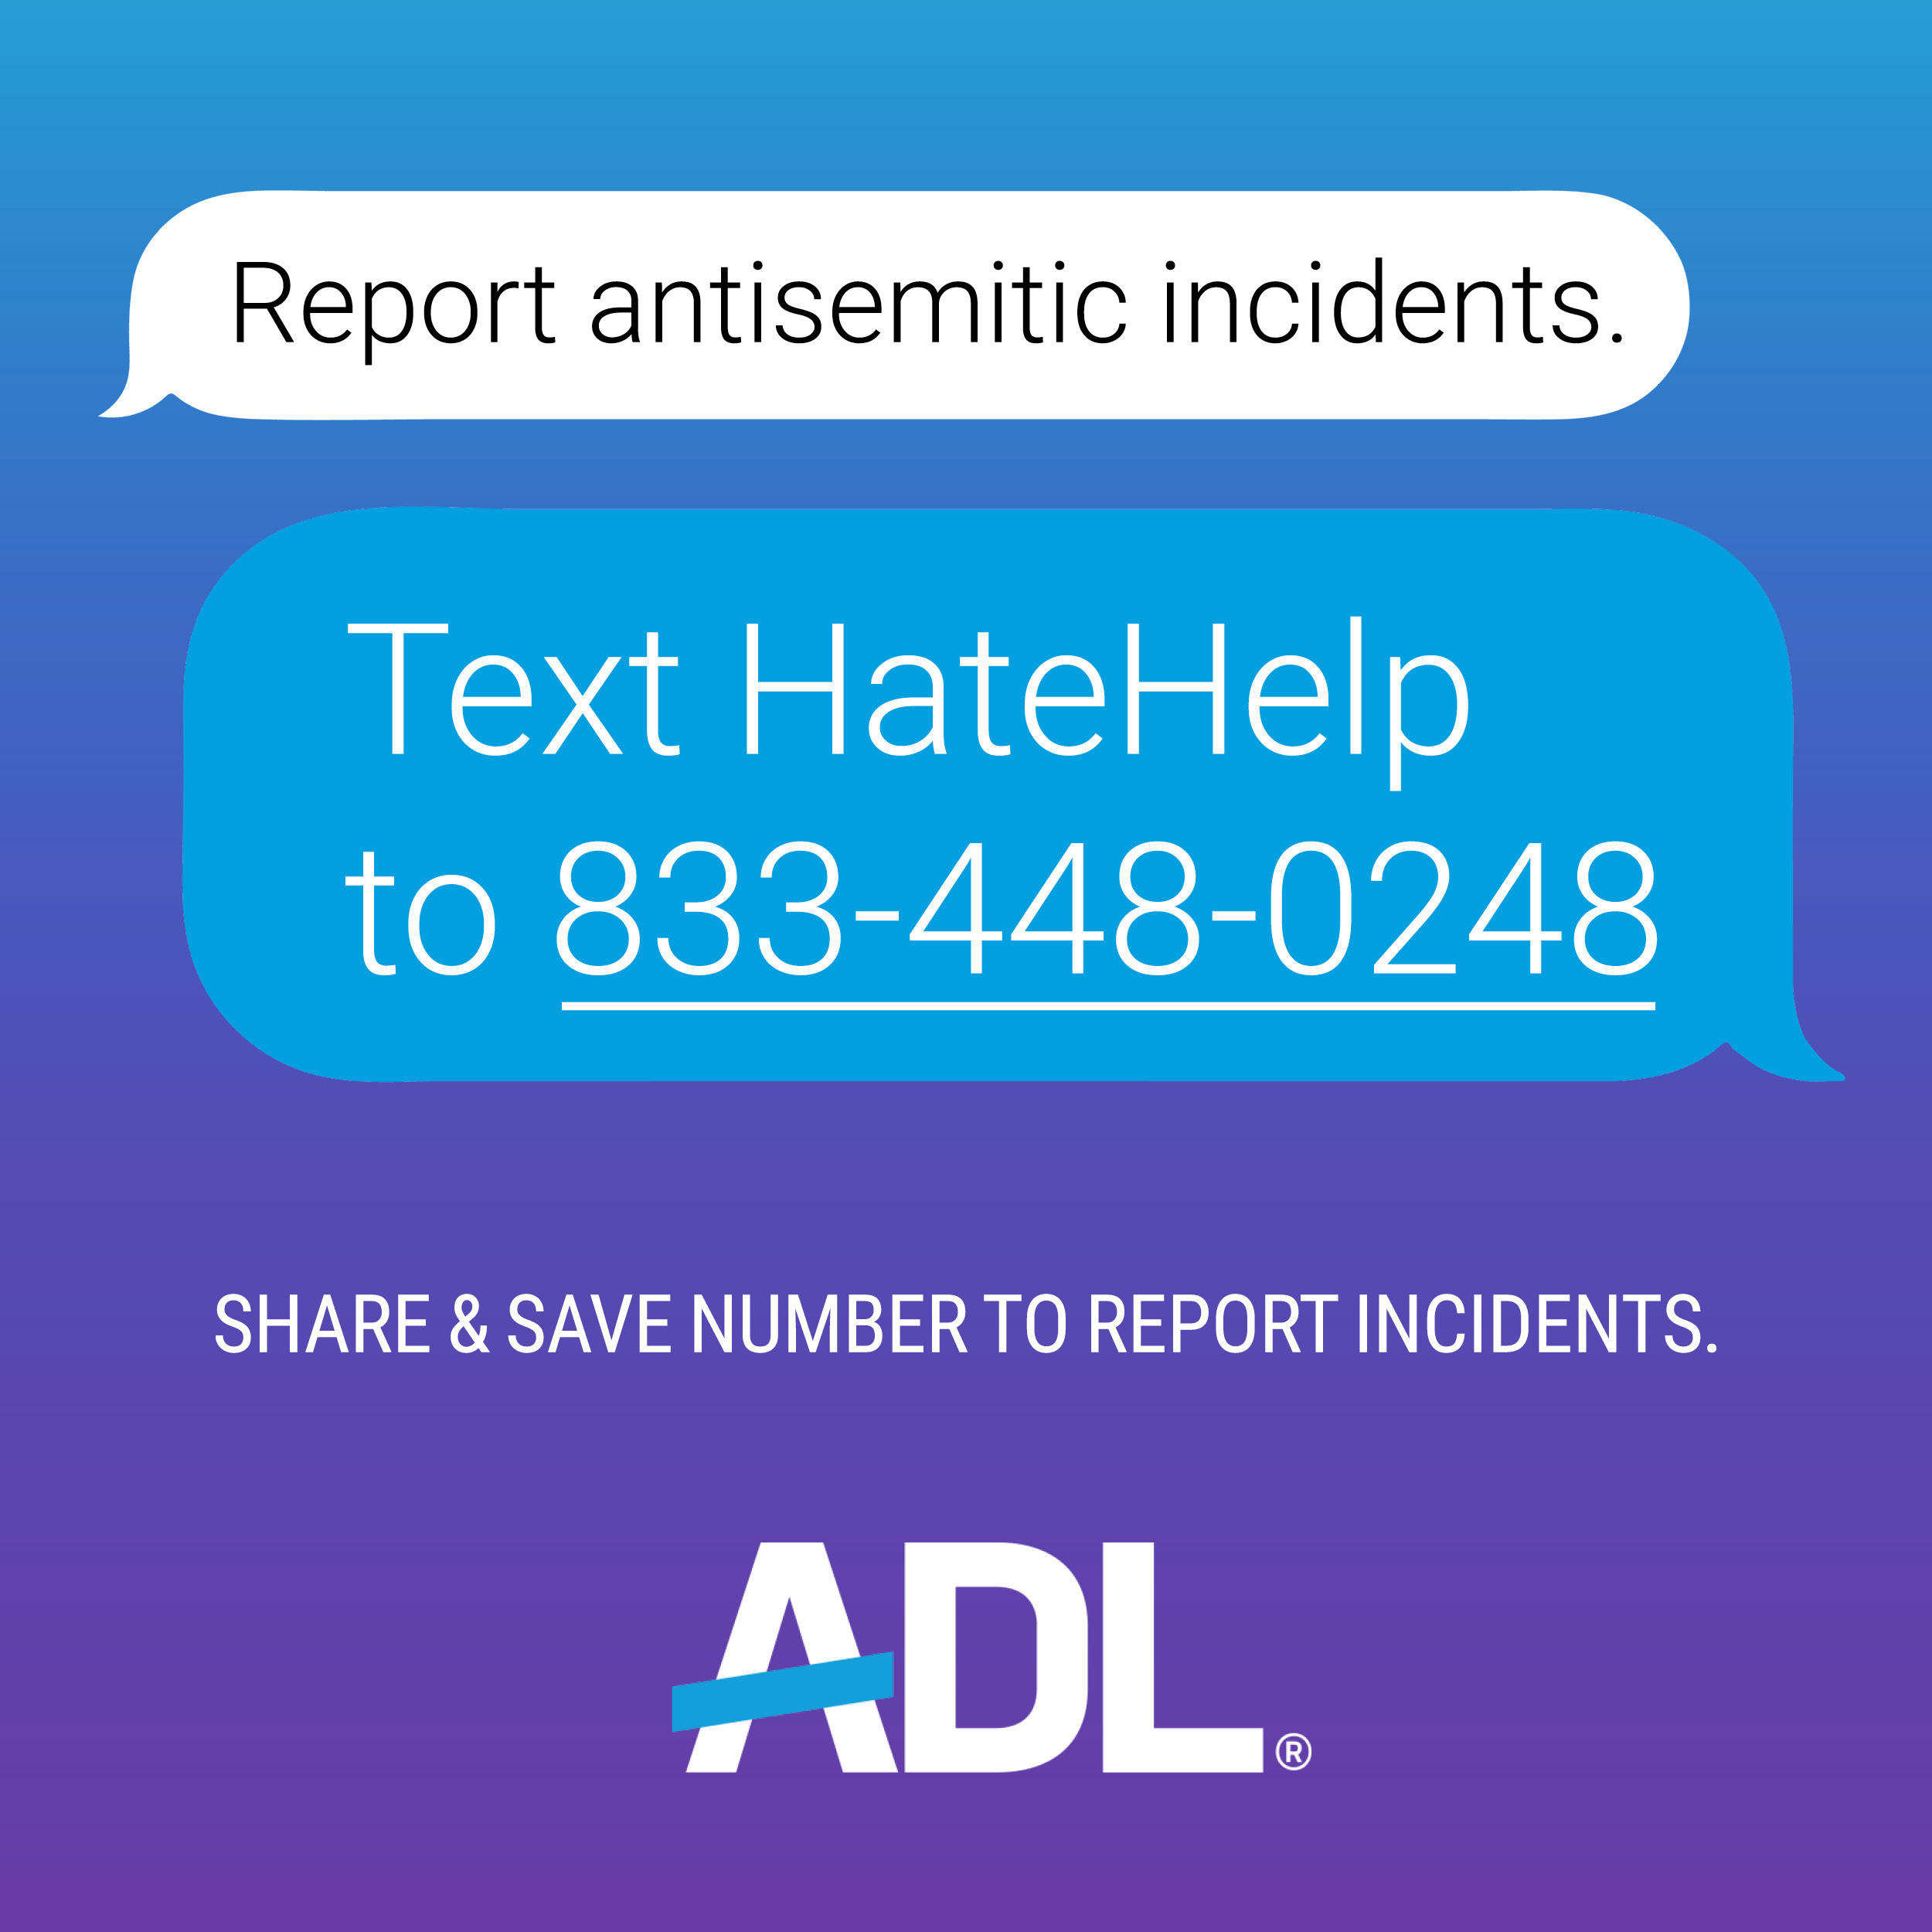 Report antisemitic incidents. Text HateHelp to 833-448-0248 Share & save number to report incidents. ADL logo